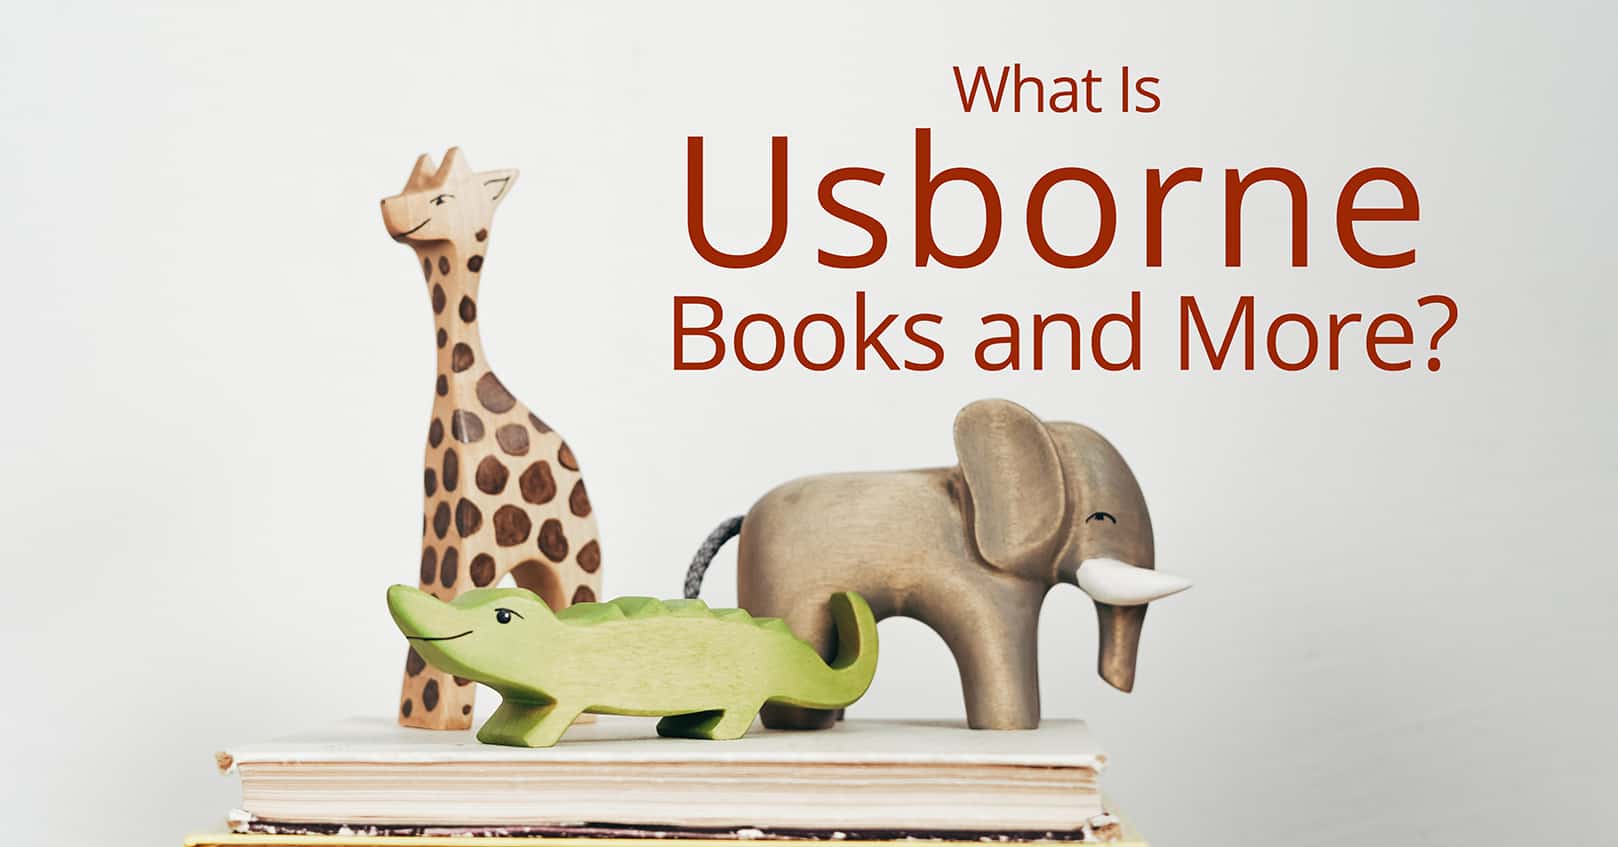 What Is Usborne Books and More